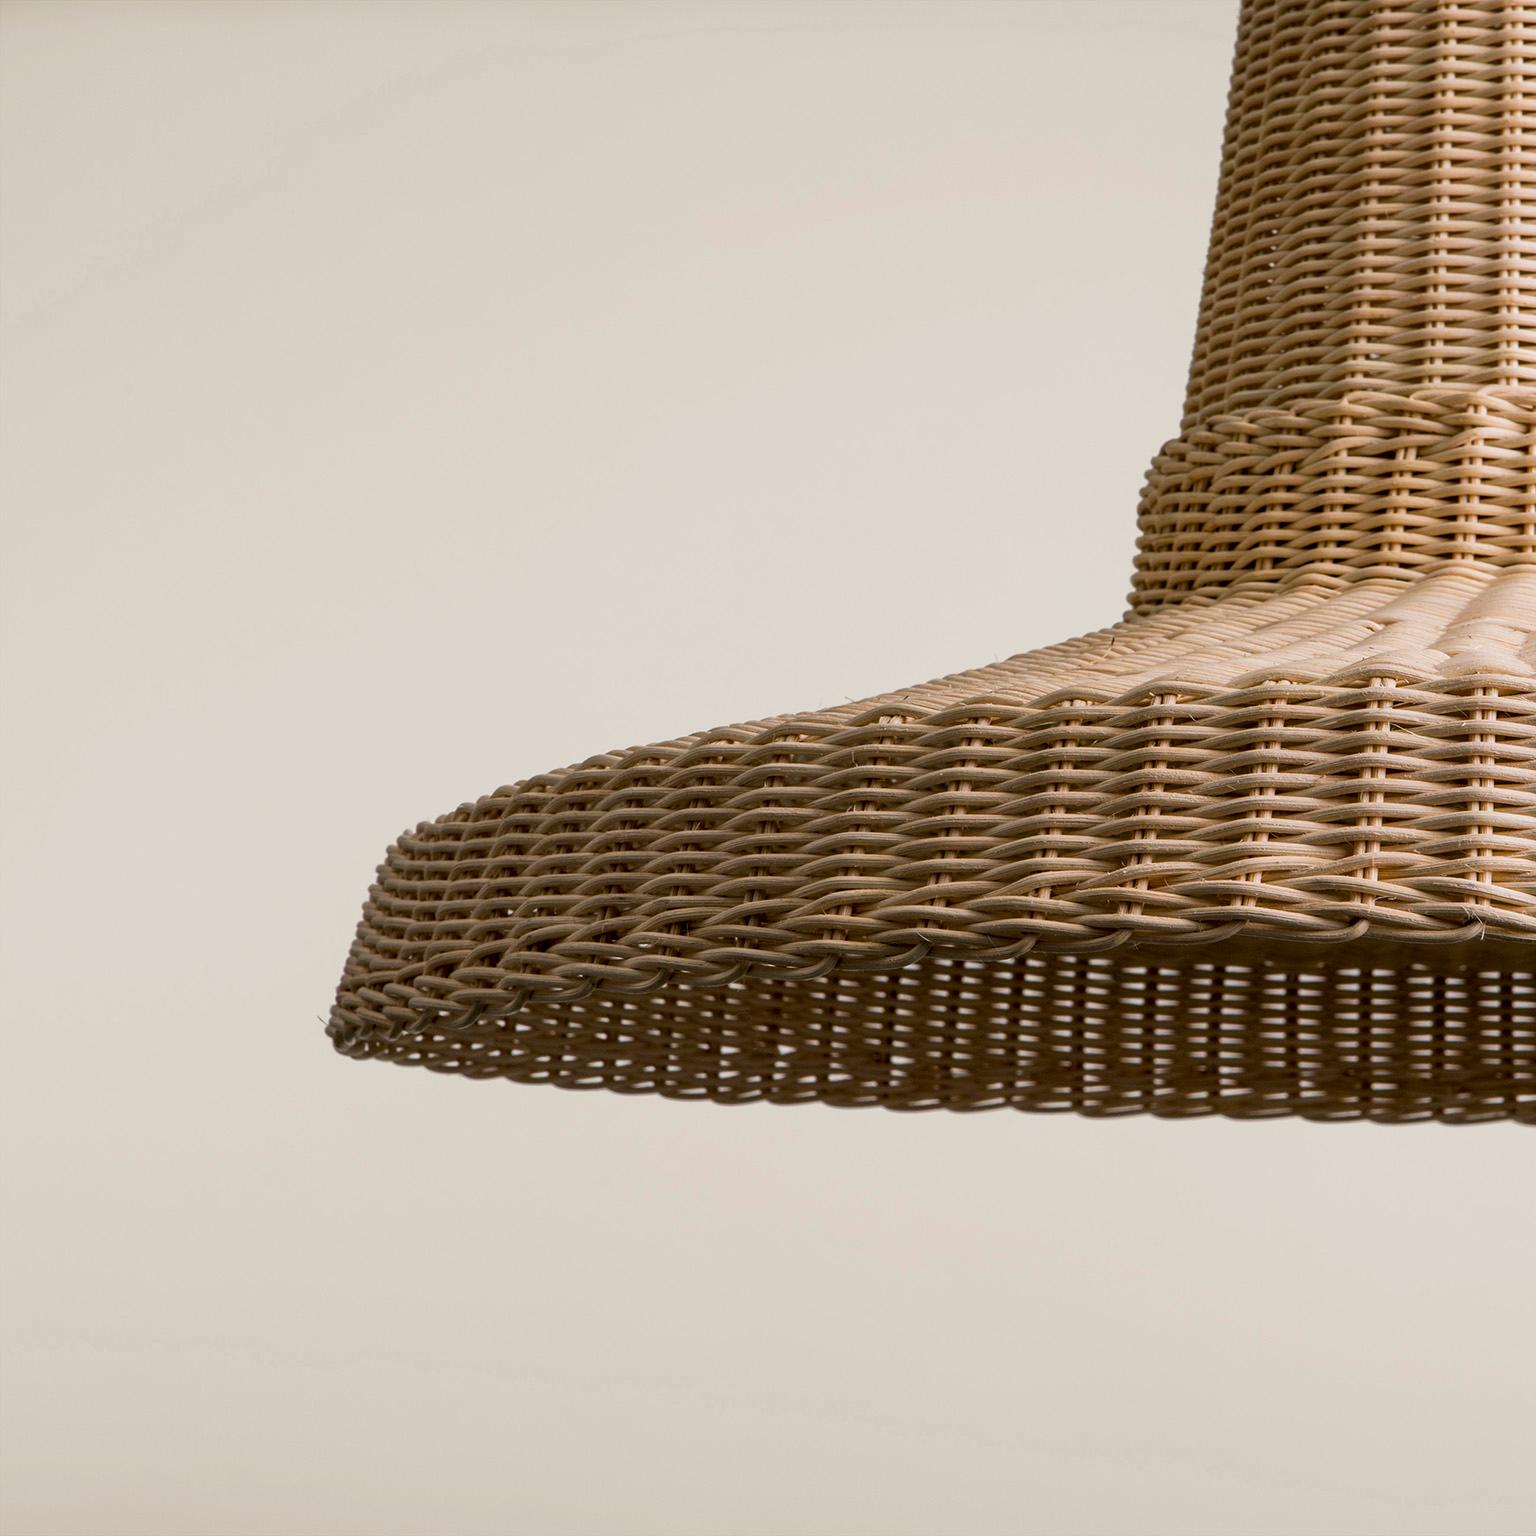 Pendant light with lampshade in intertwined wicker. 135 meters of wicker are carefully selected and then skilfully shaped for over 6.5 hours of patient intertwining.
The Cocolla lamp is subject to a water-color protective treatment of natural,